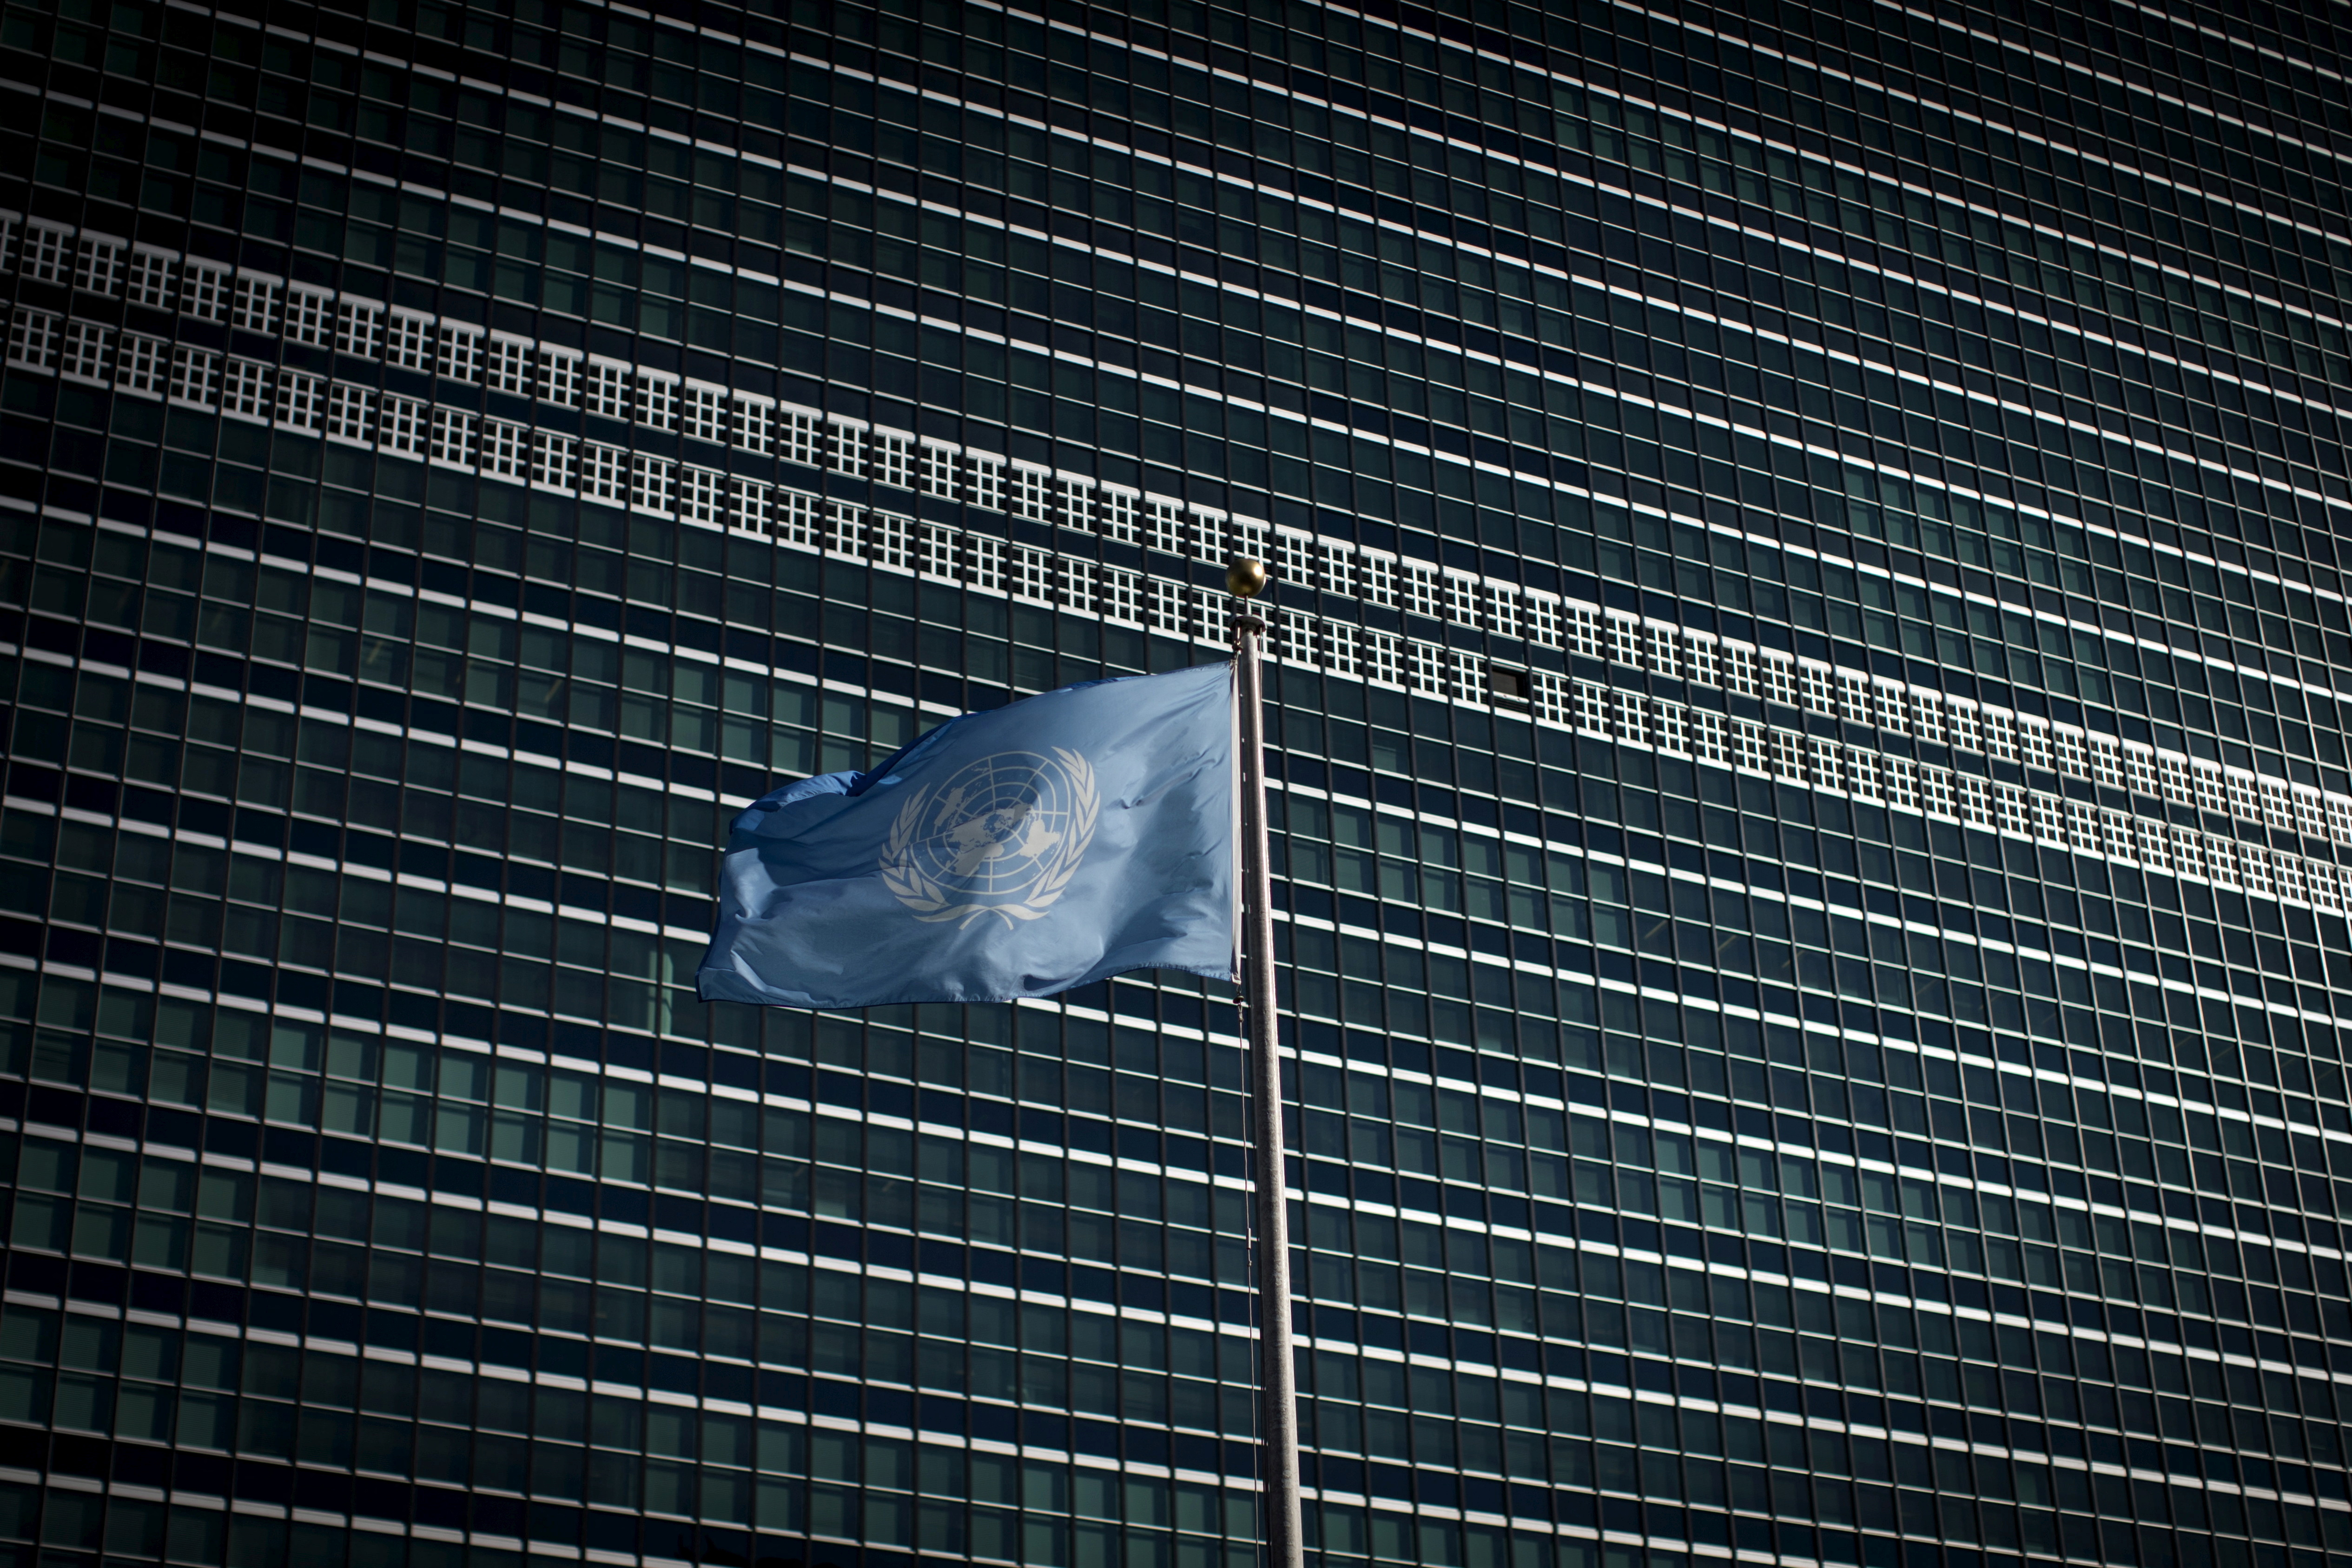 The United Nations flag flies in front of the Secretariat Building at the United Nations headquarters in New York City